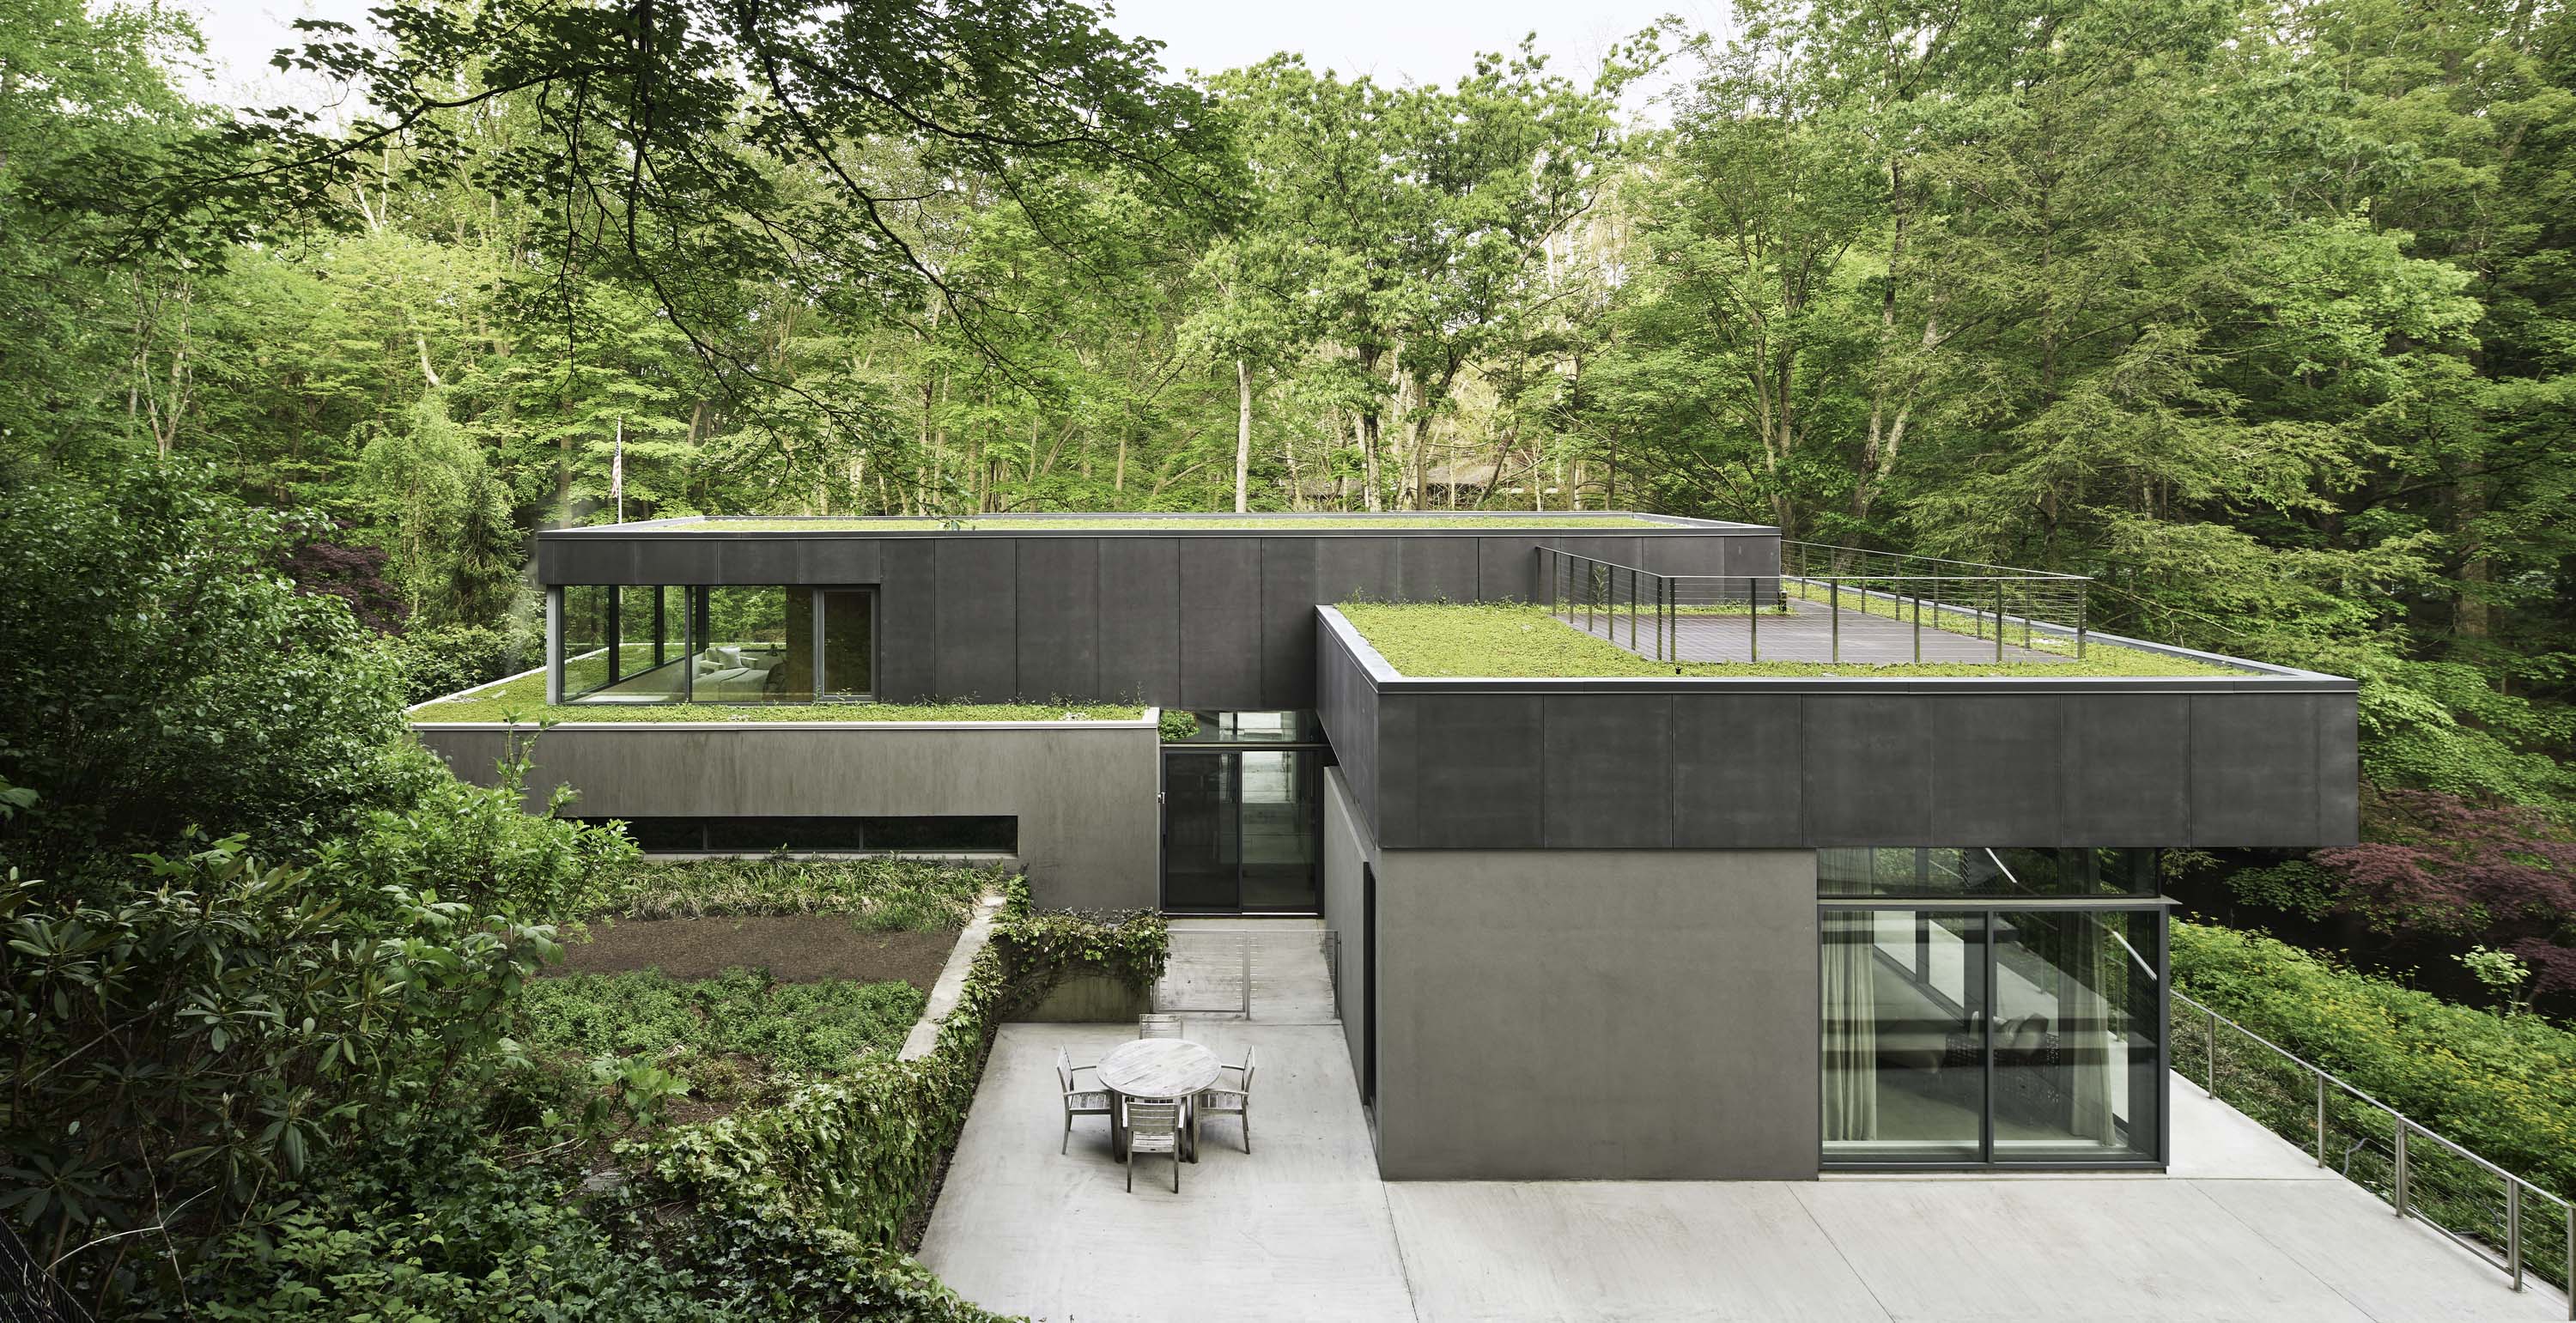 Exterior photo of Weston Residence by Specht Novak Architects. Shot by Jasper Lazor, featuring the concrete and glass home with roof gardens immersed in the landscape.